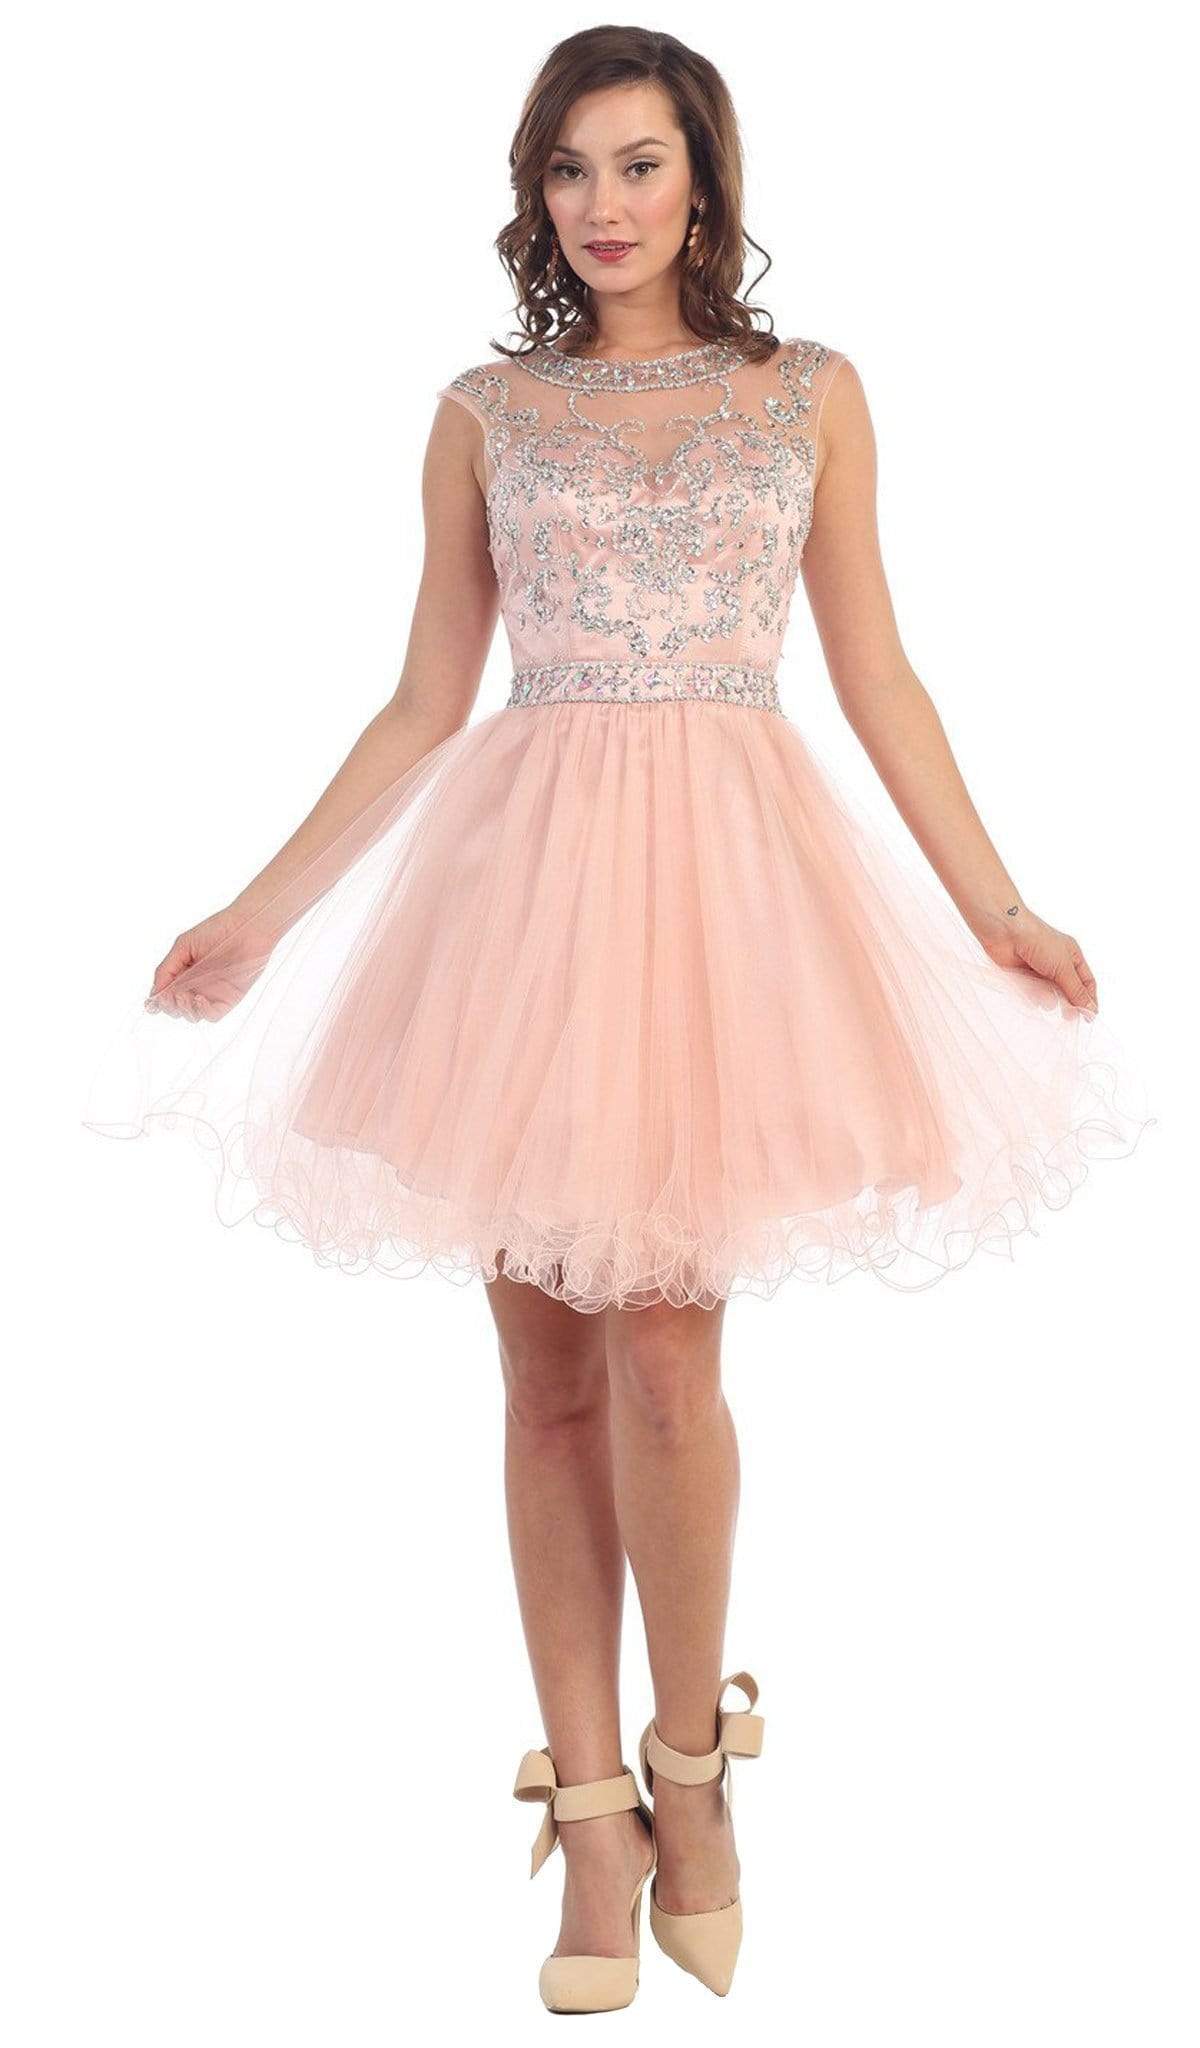 May Queen - Beaded Illusion Tulle Cocktail Dress
